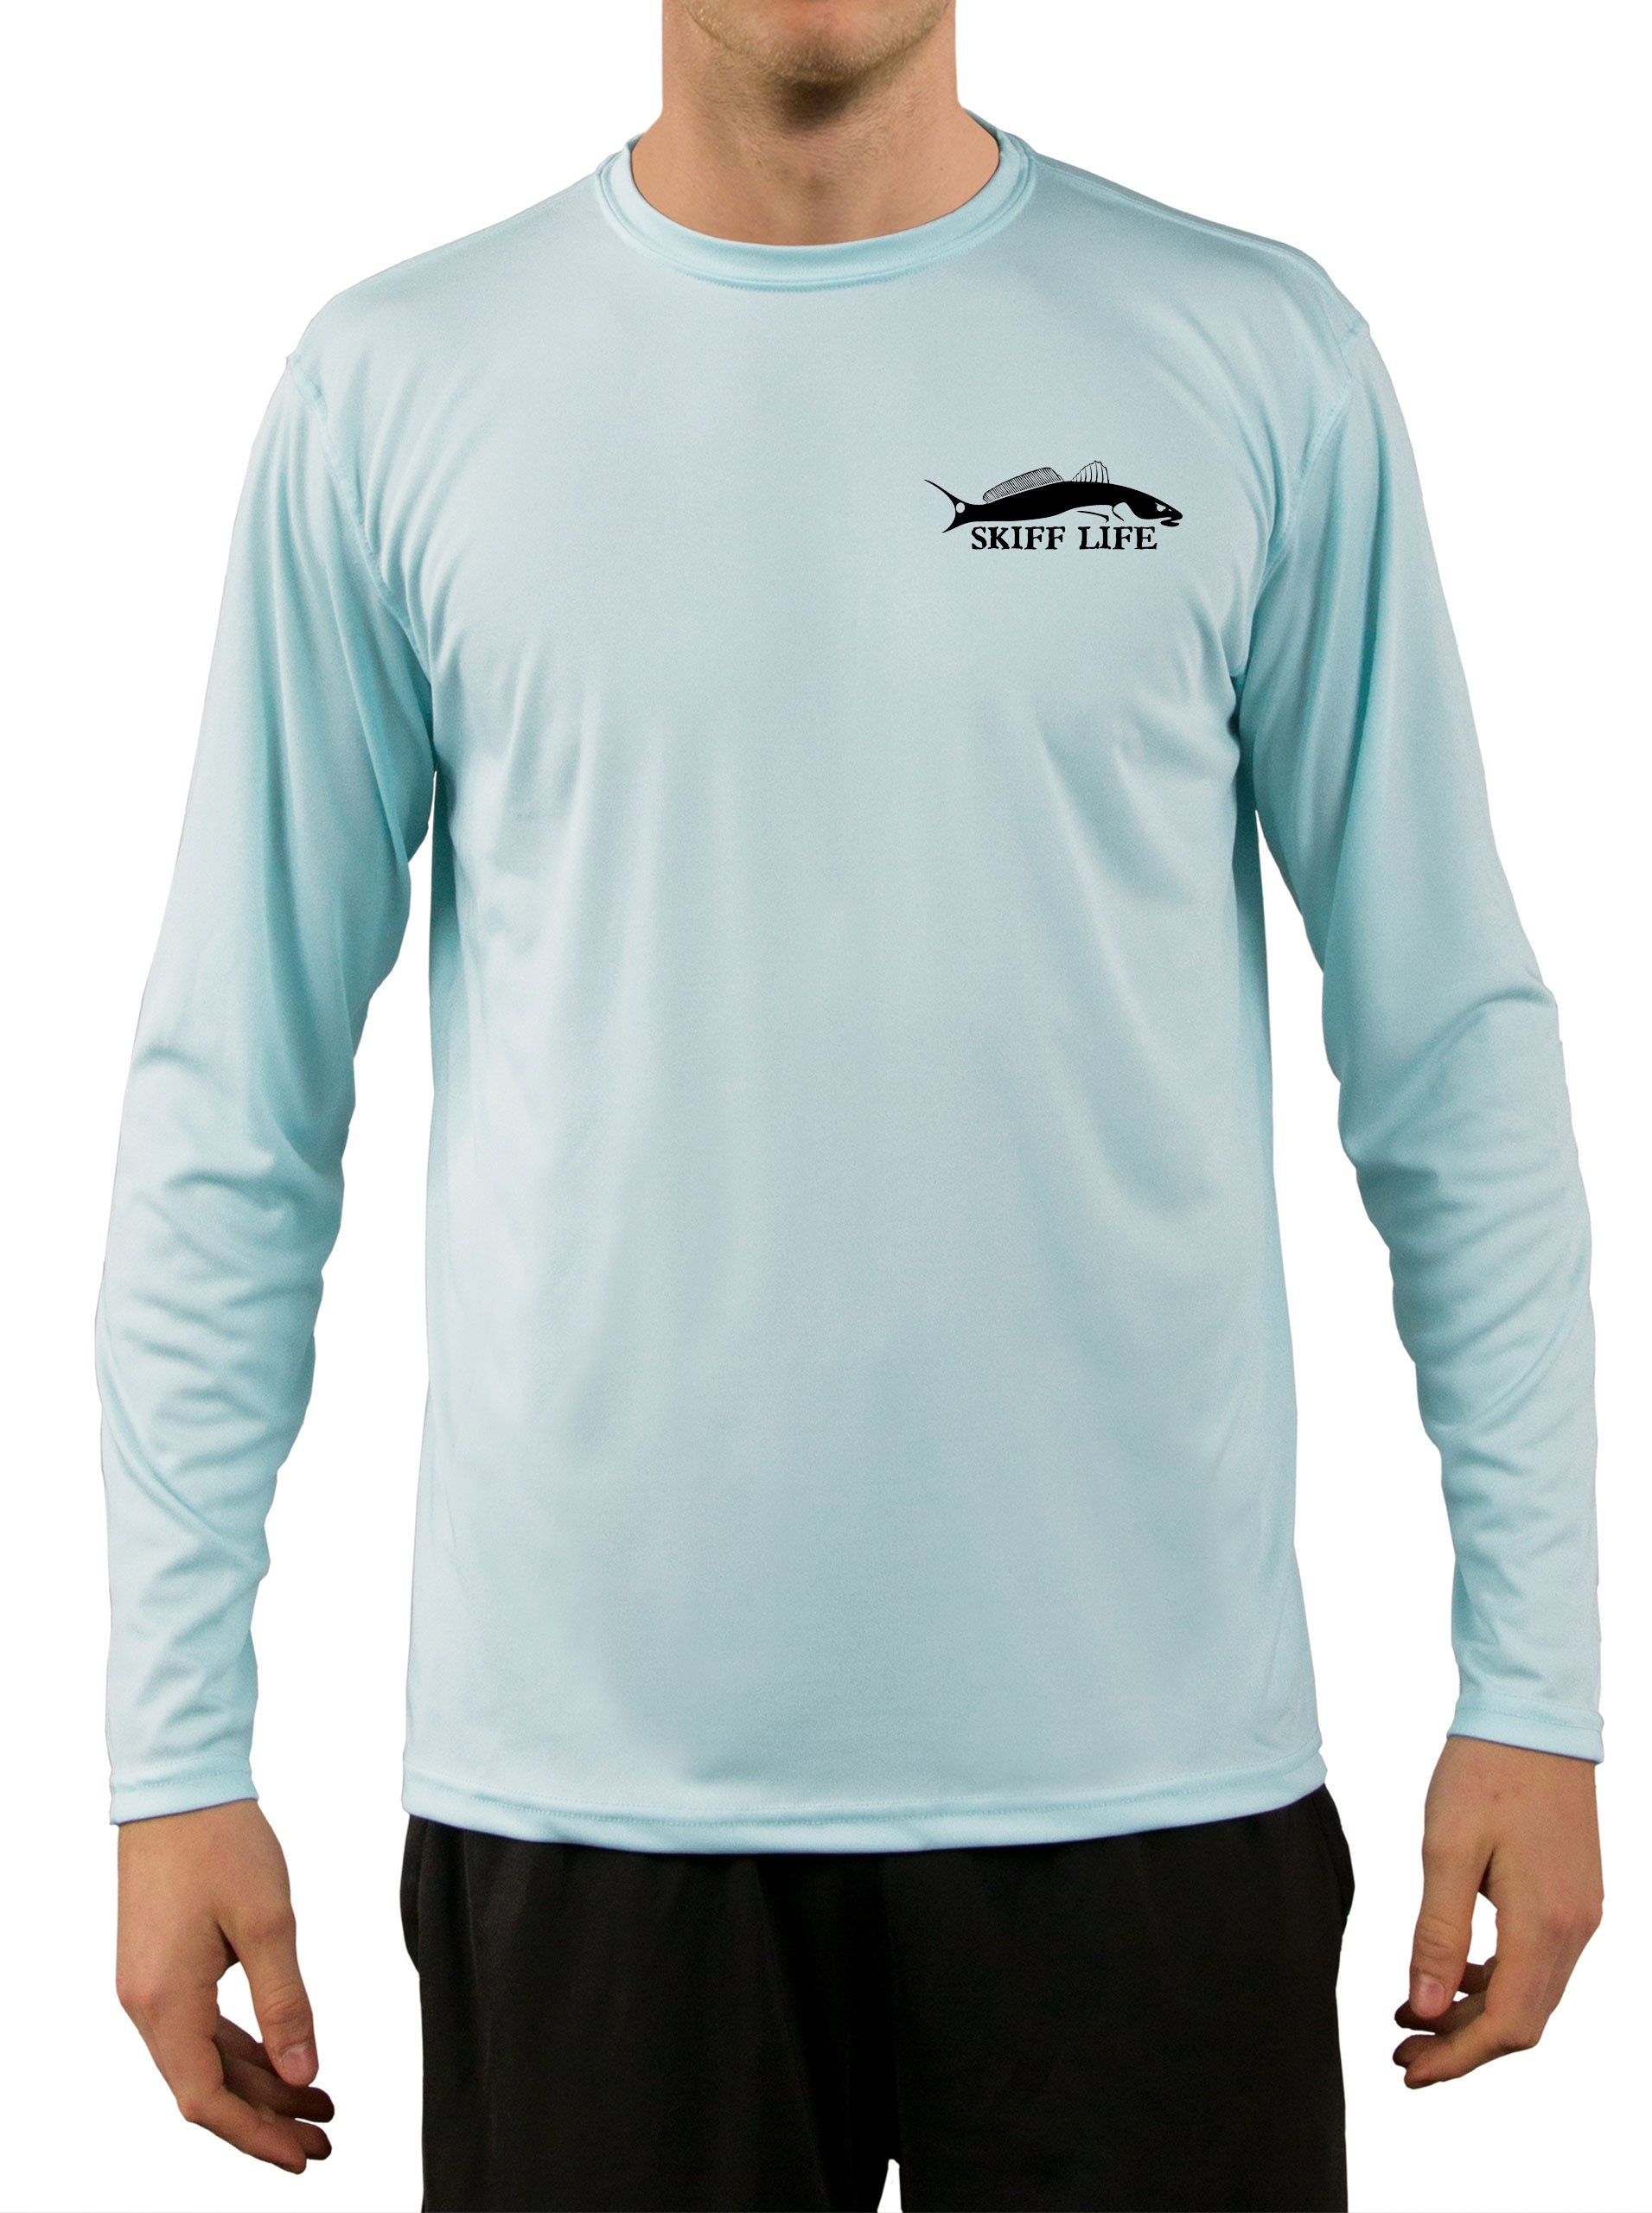 Bass Fishing Performance Dry-Fit 50+ UPF Sun Protection Shirts -Reel Fishy Apparel S / Gray S/S - unisex